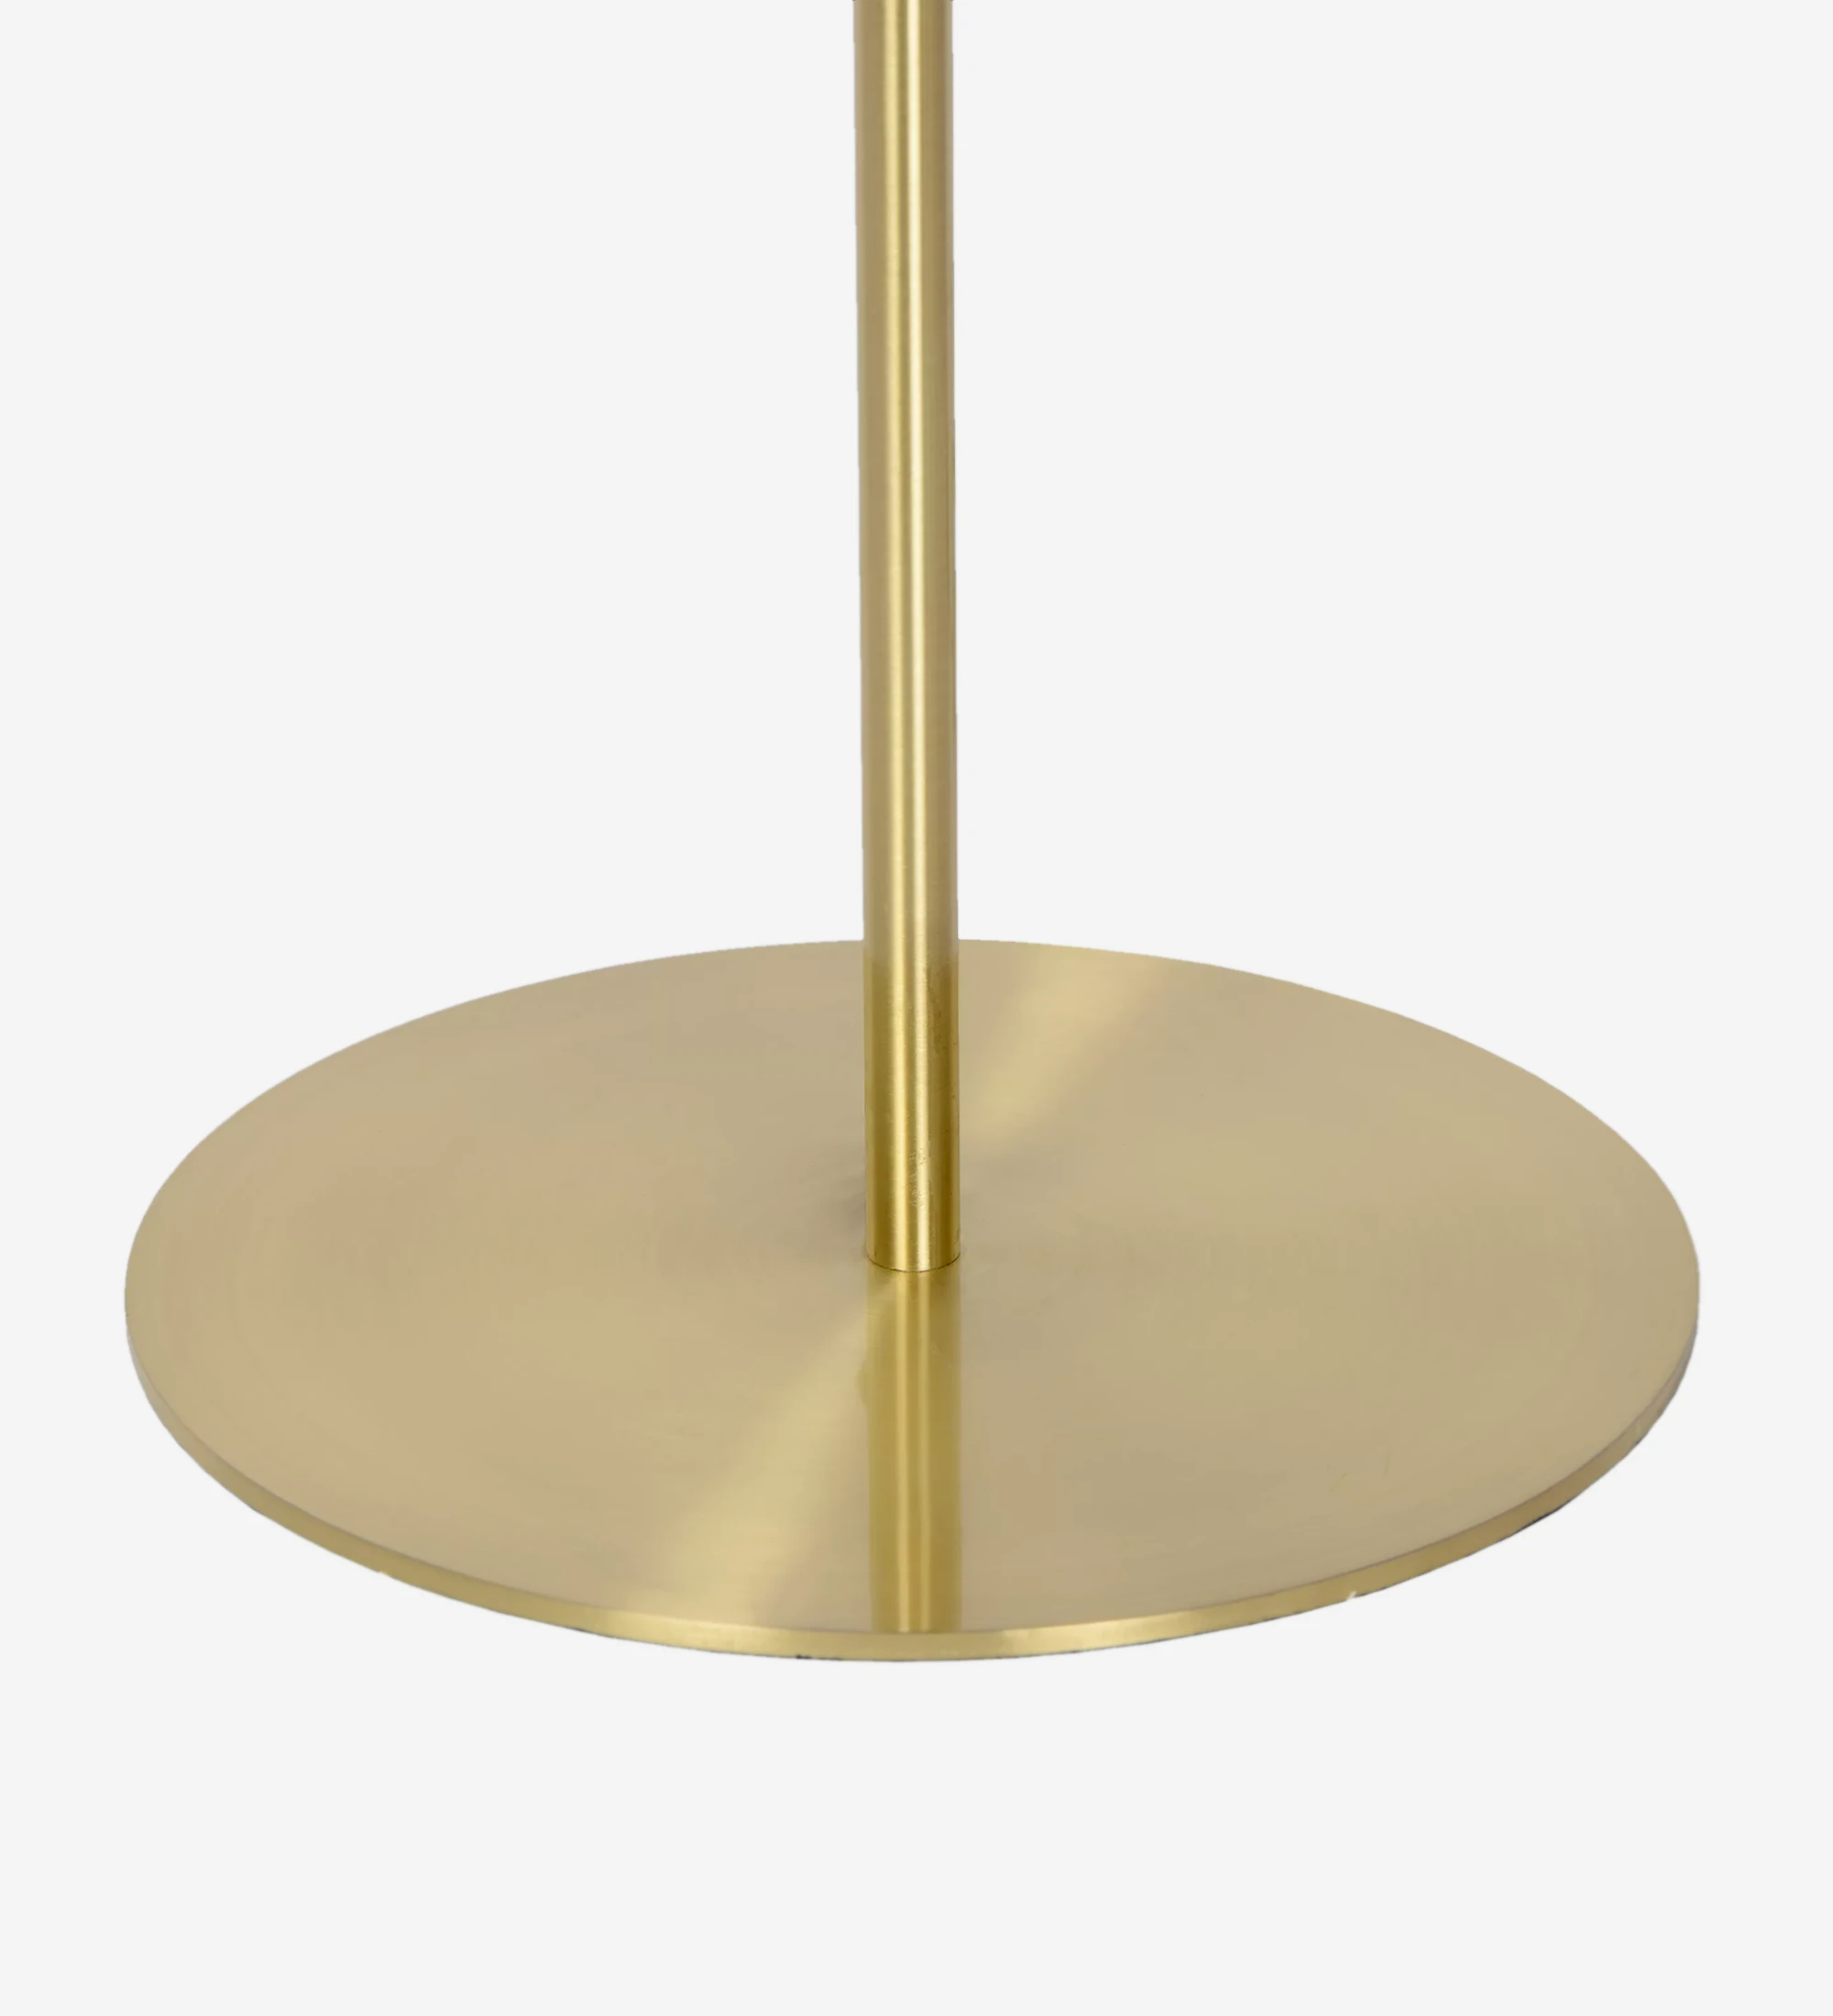 Floor lamp in matte gold steel and smoky glass diffusers.